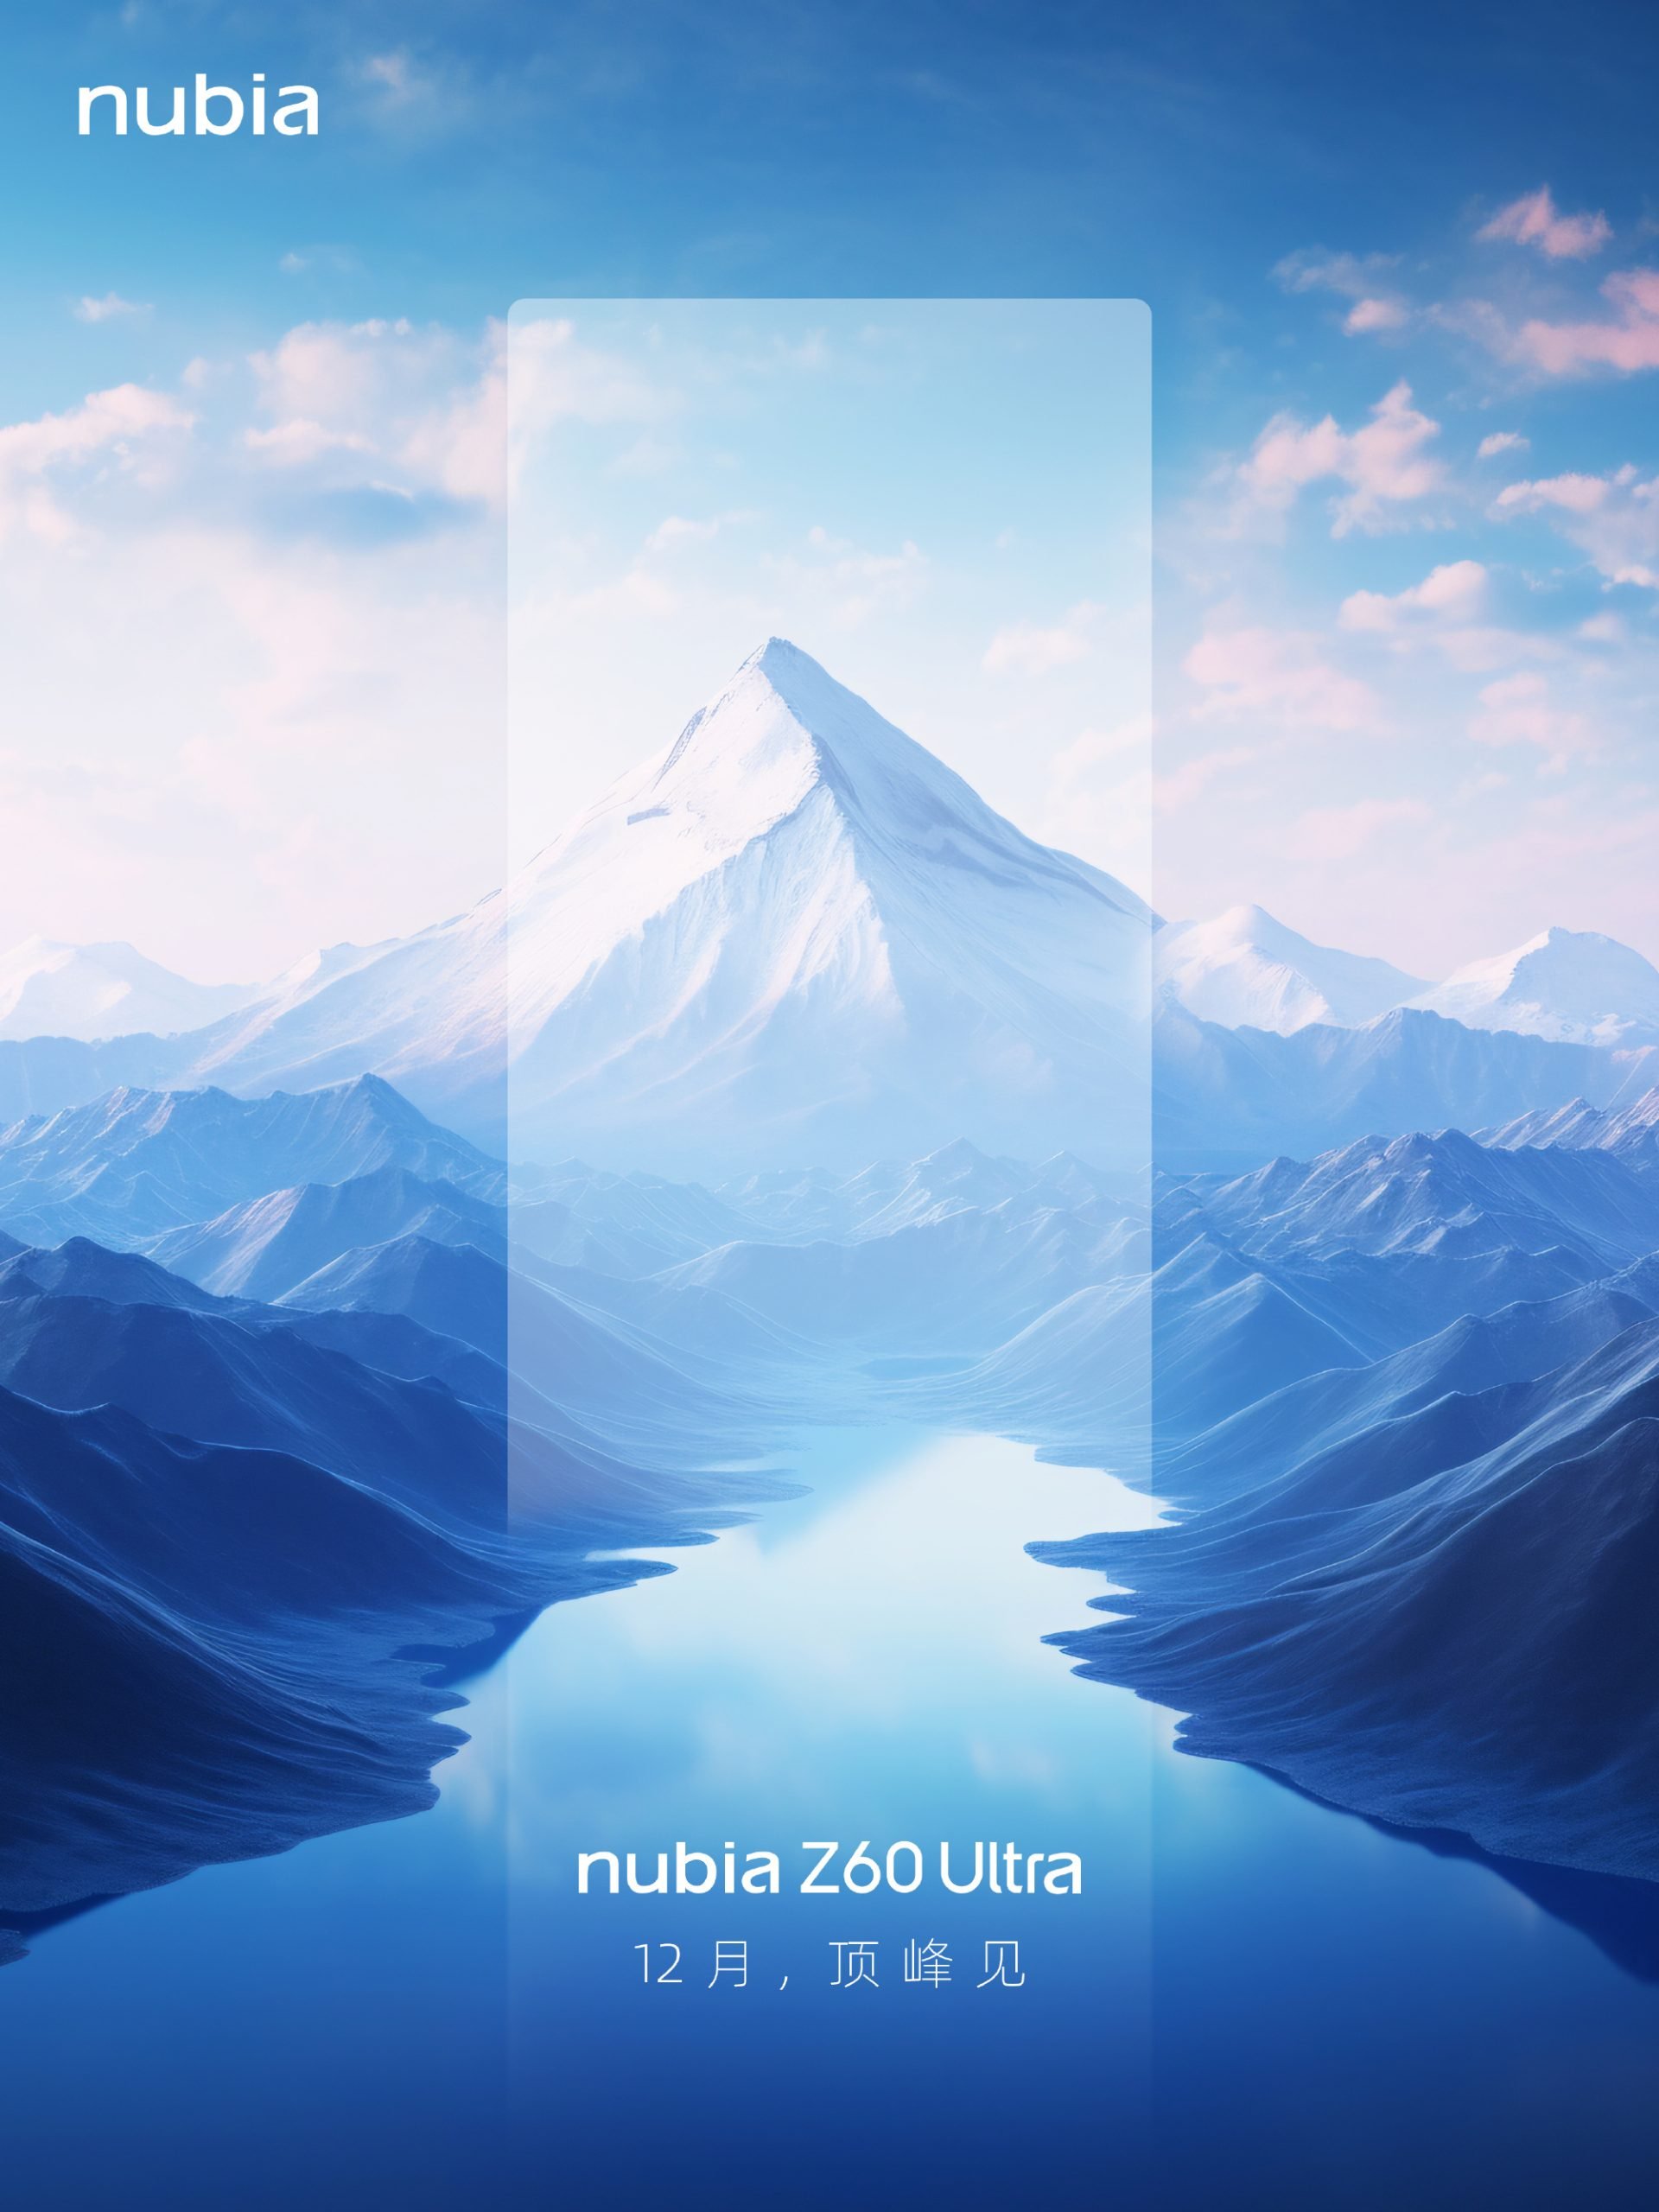 Nubia Z60 Ultra confirmed to launch in December - Gizmochina